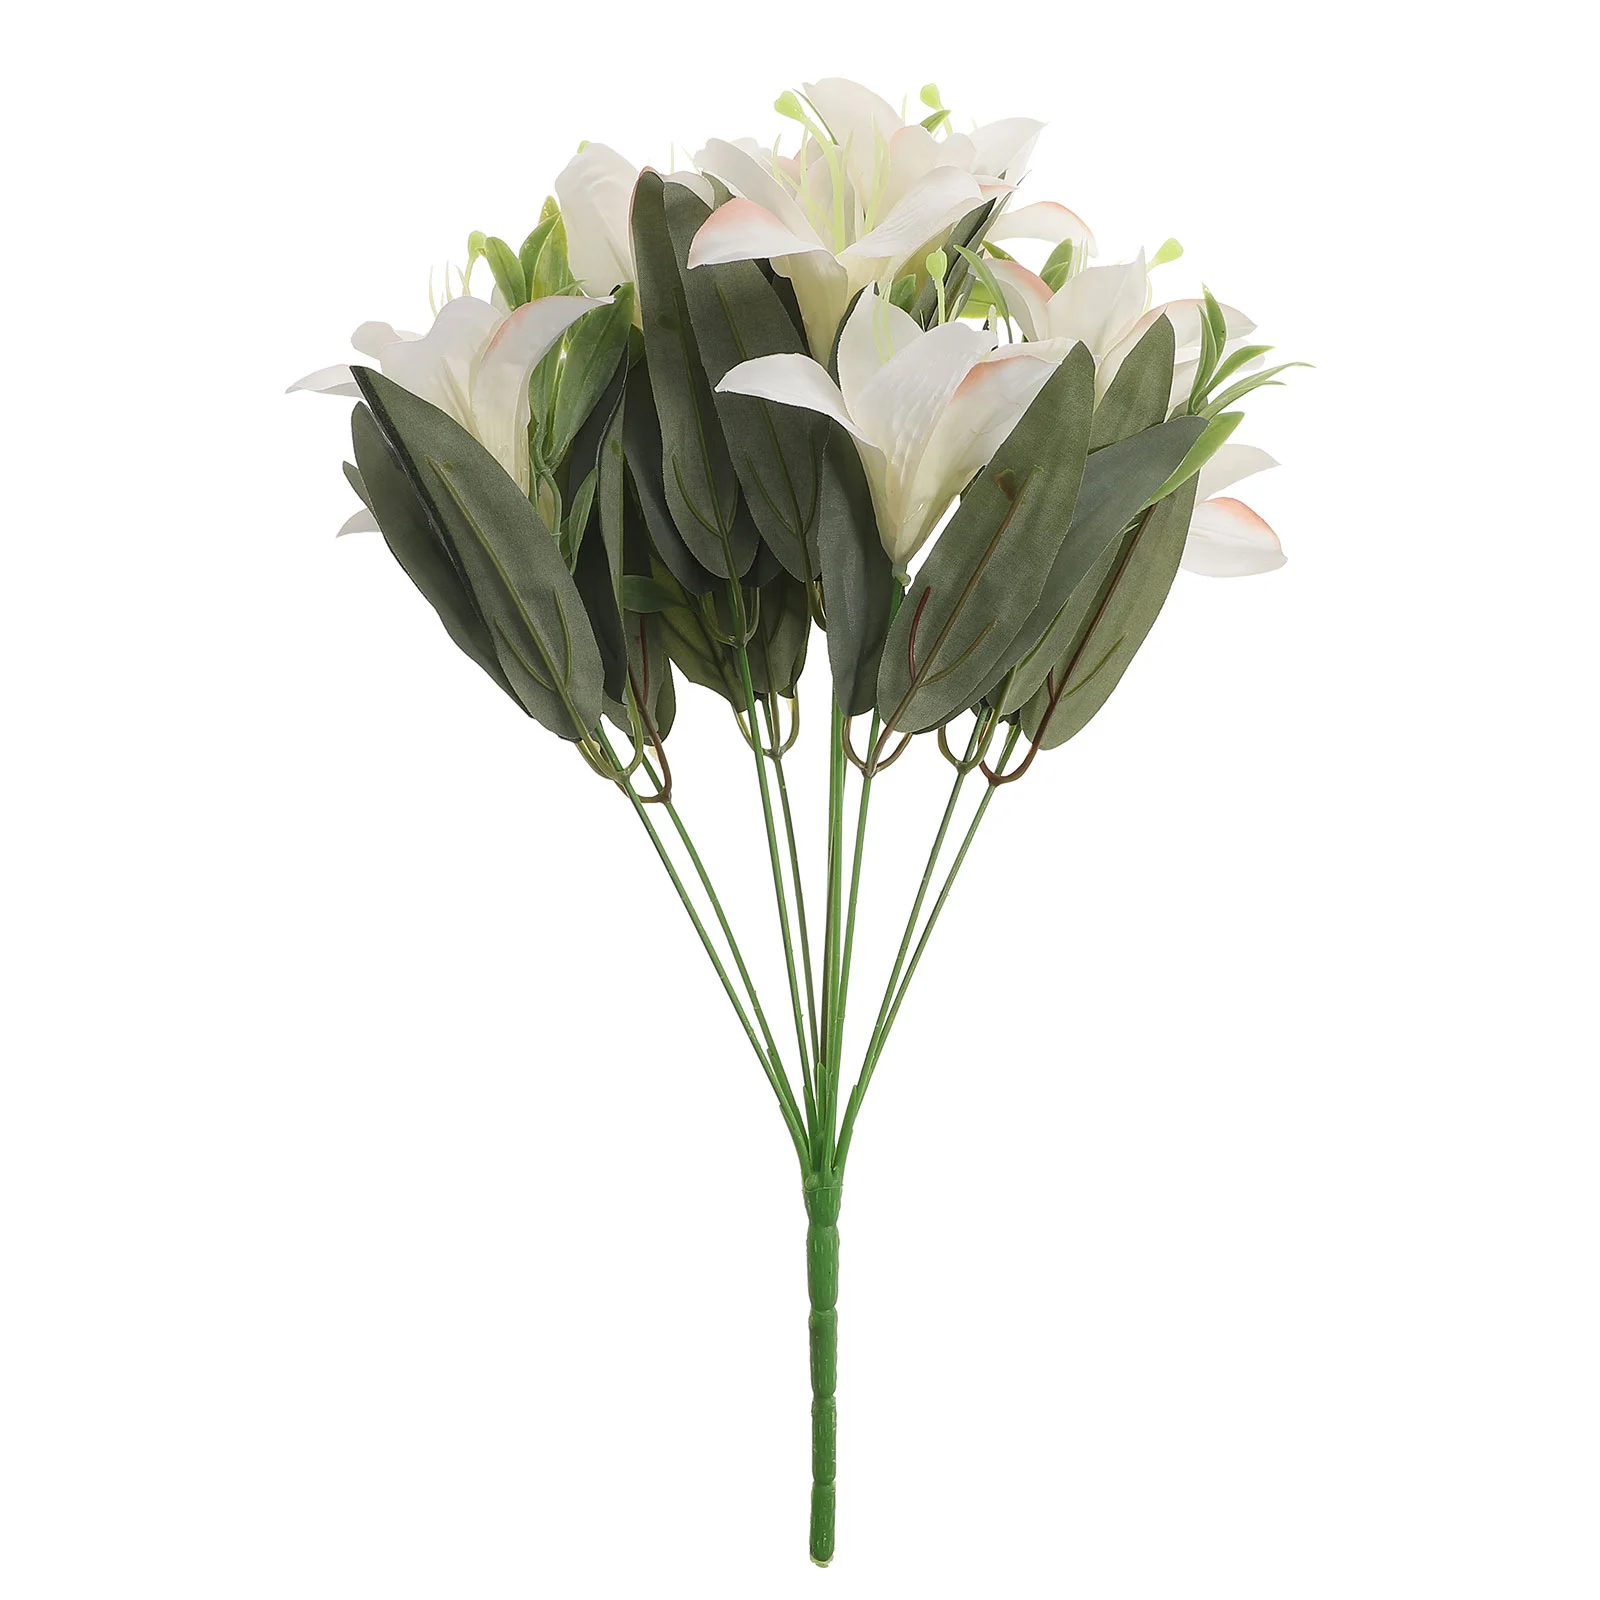 

Shrub Flower Lifelike Artificial Lily Bouquet Prop Wedding Party Ornamental Simulated Decoration Flowers